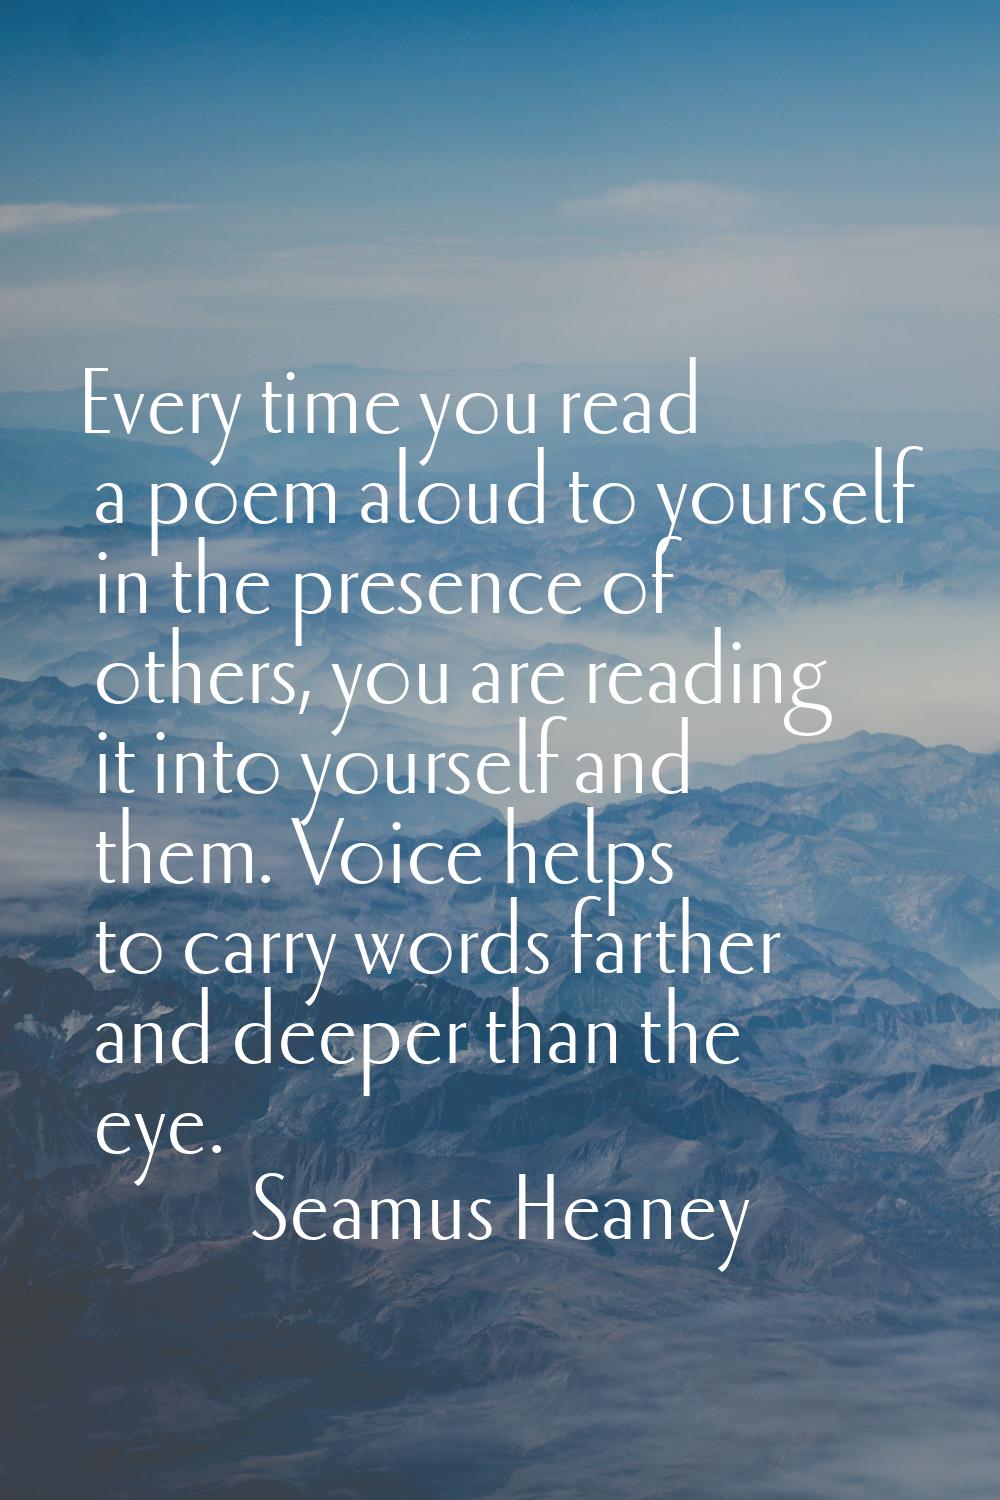 Every time you read a poem aloud to yourself in the presence of others, you are reading it into you